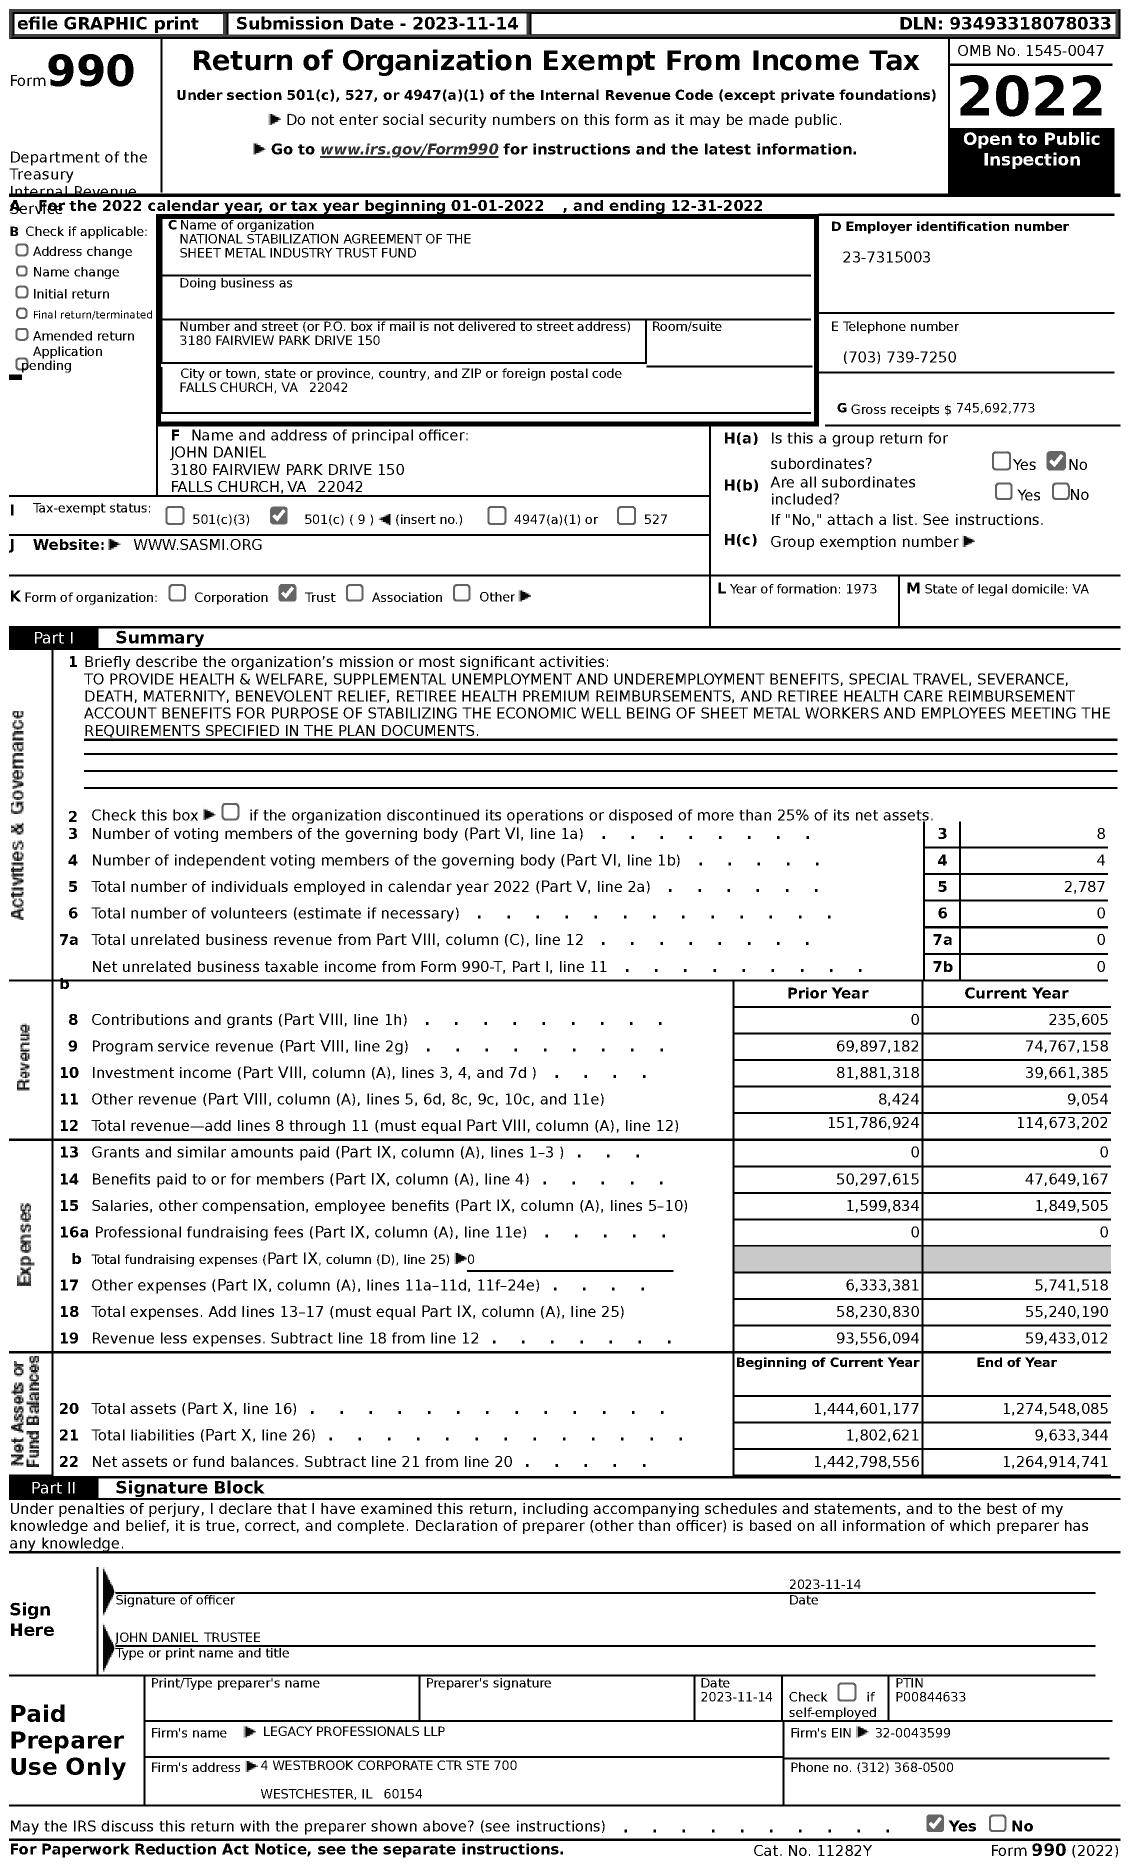 Image of first page of 2022 Form 990 for National Stabilization AGREEMENT OF The Sheet Metal Industry Trust FUND